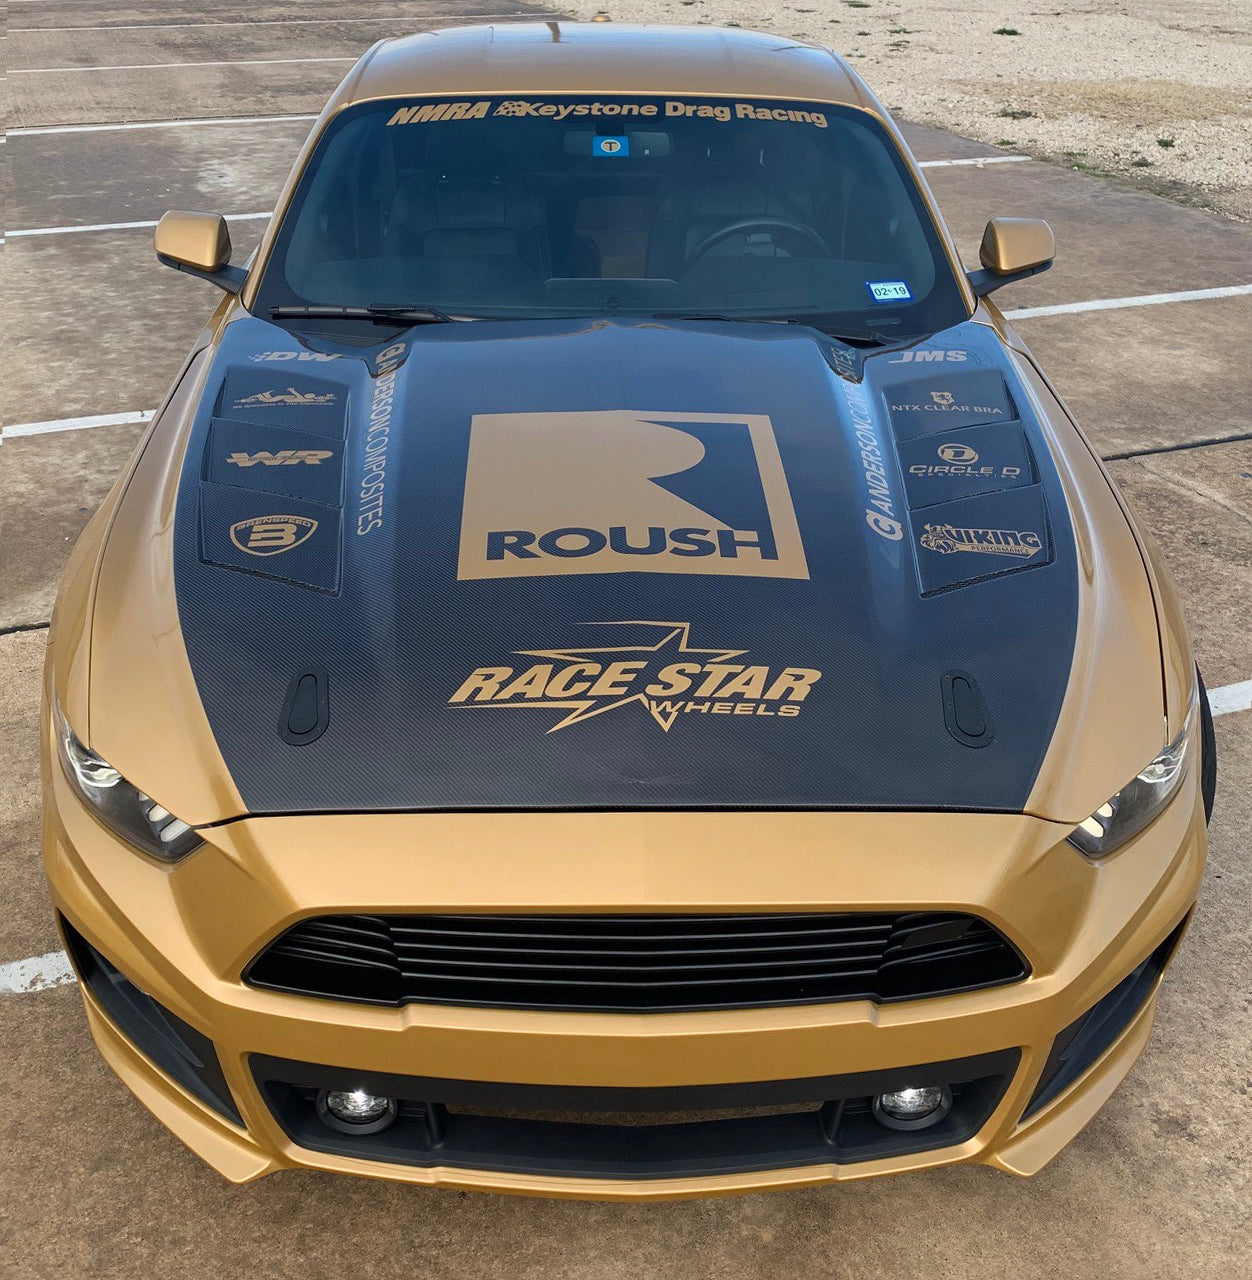 Anderson Composites tagged mustang Page 3